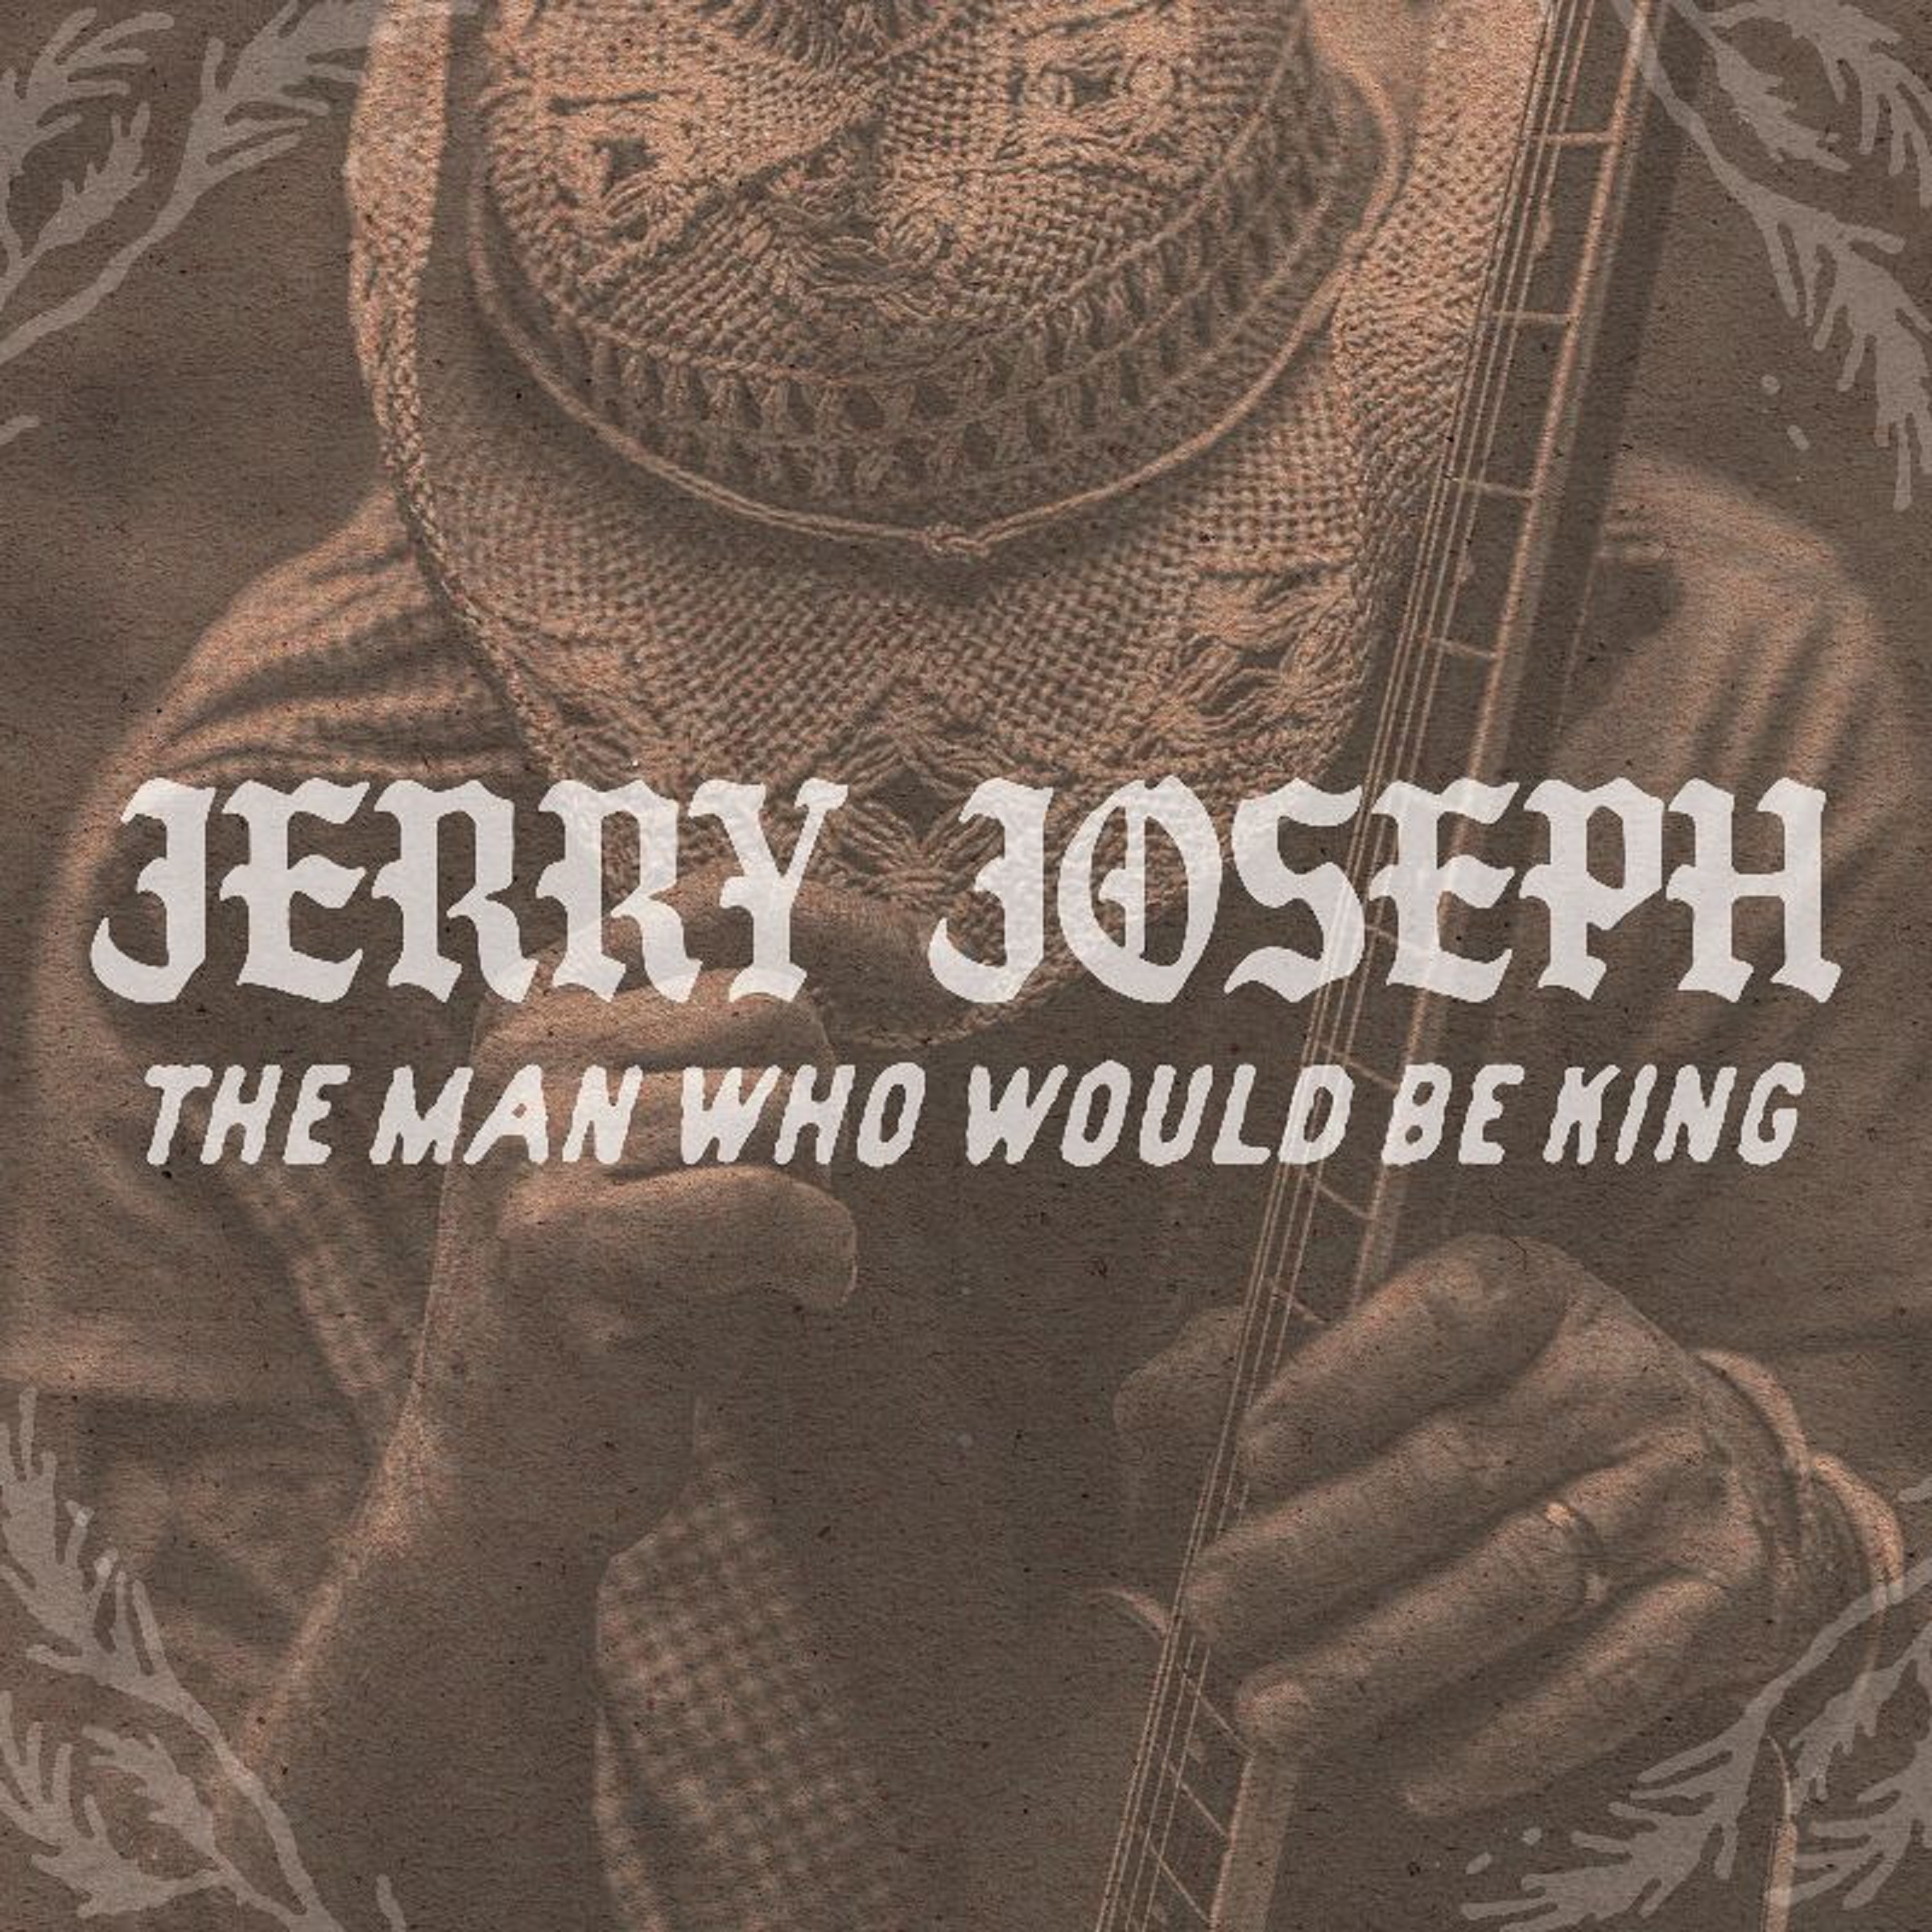 Jerry Joseph Premieres “The Man Who Would Be King”